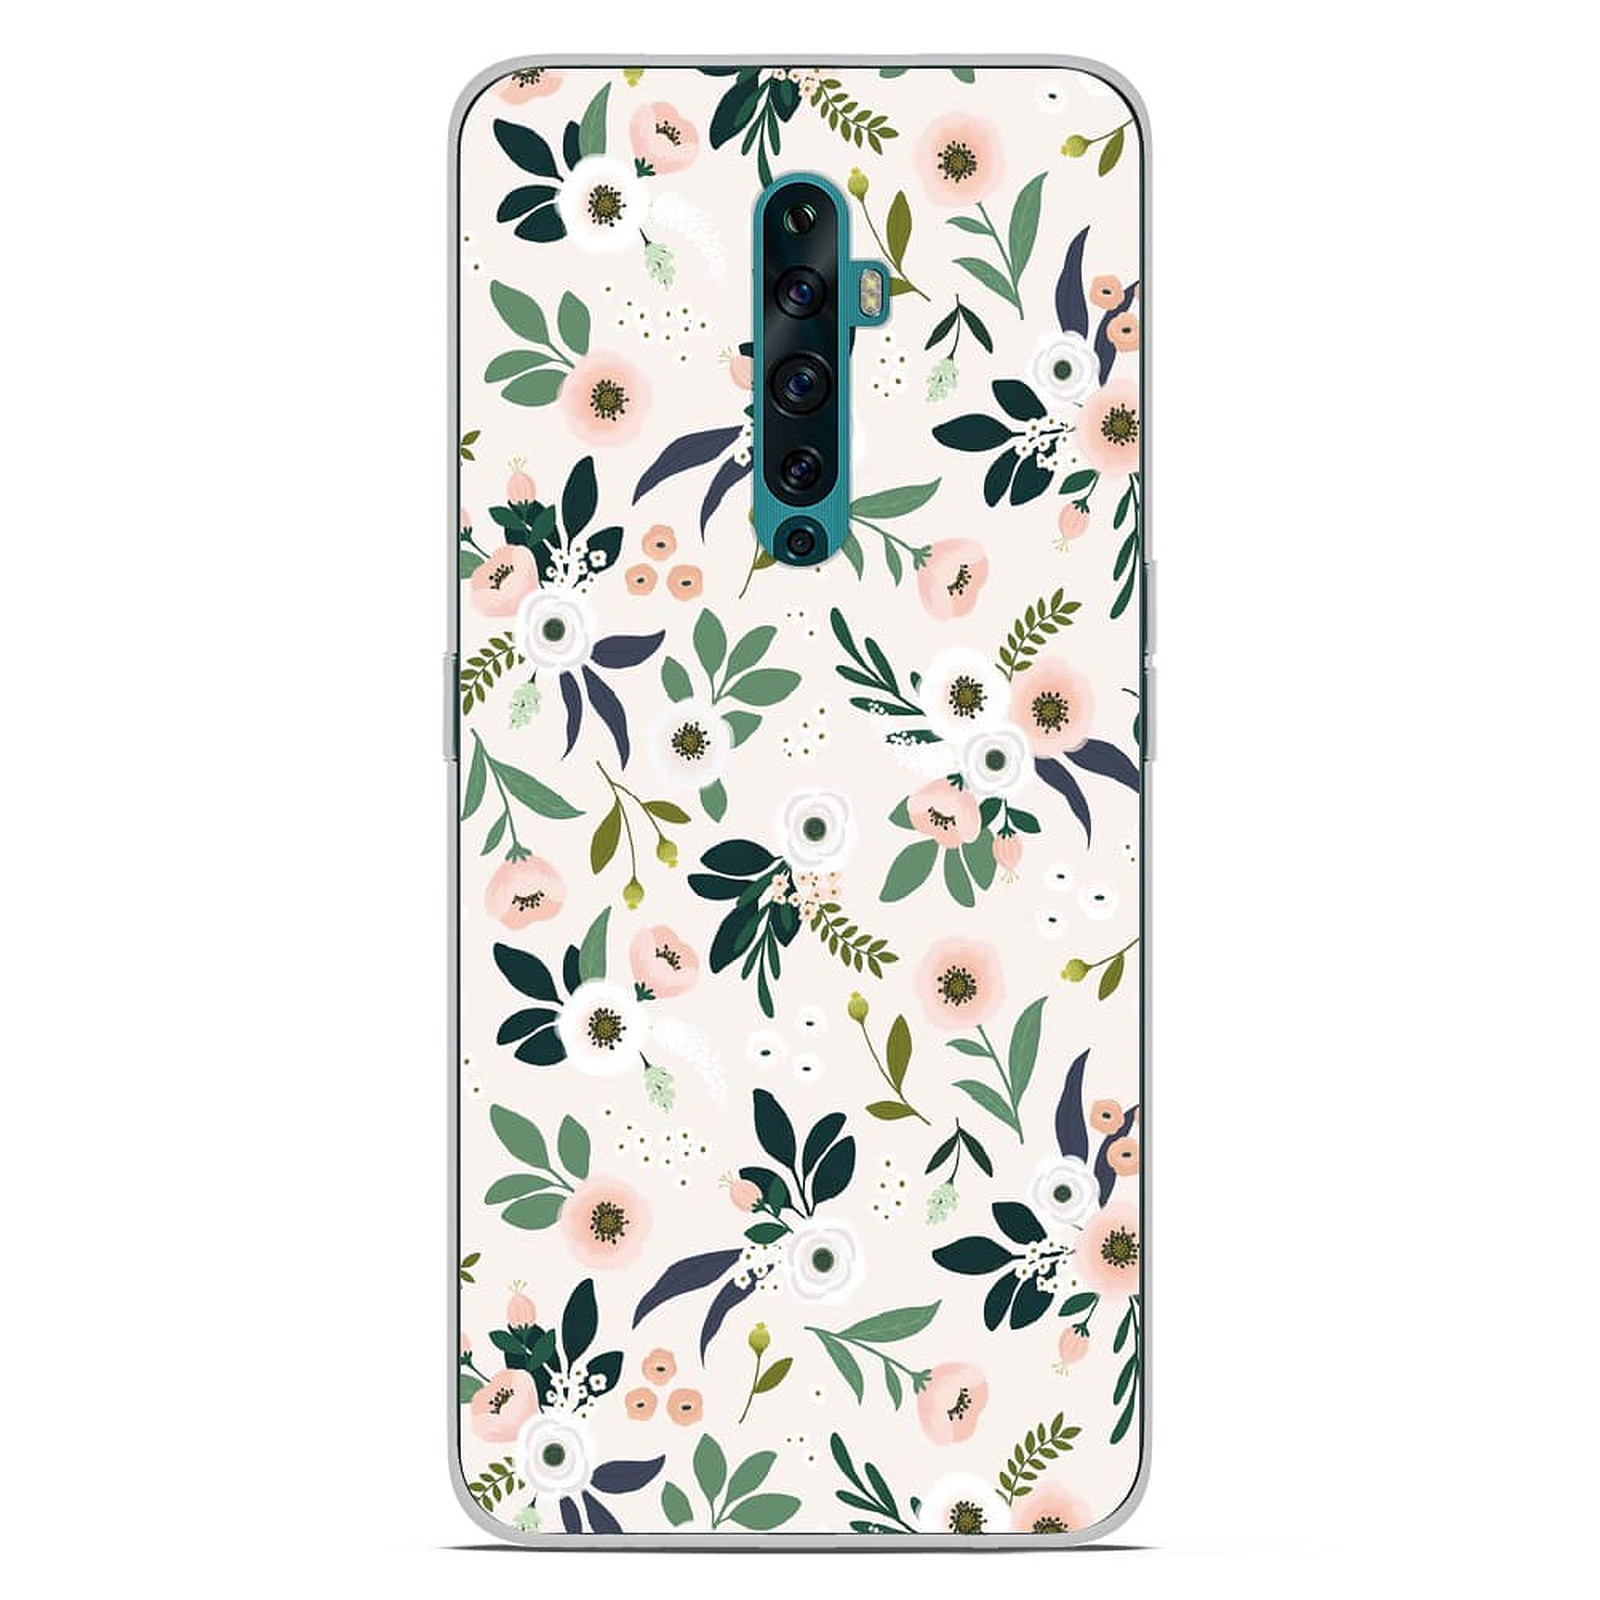 1001 Coques Coque silicone gel Oppo Reno 2Z motif Flowers - Coque telephone 1001Coques